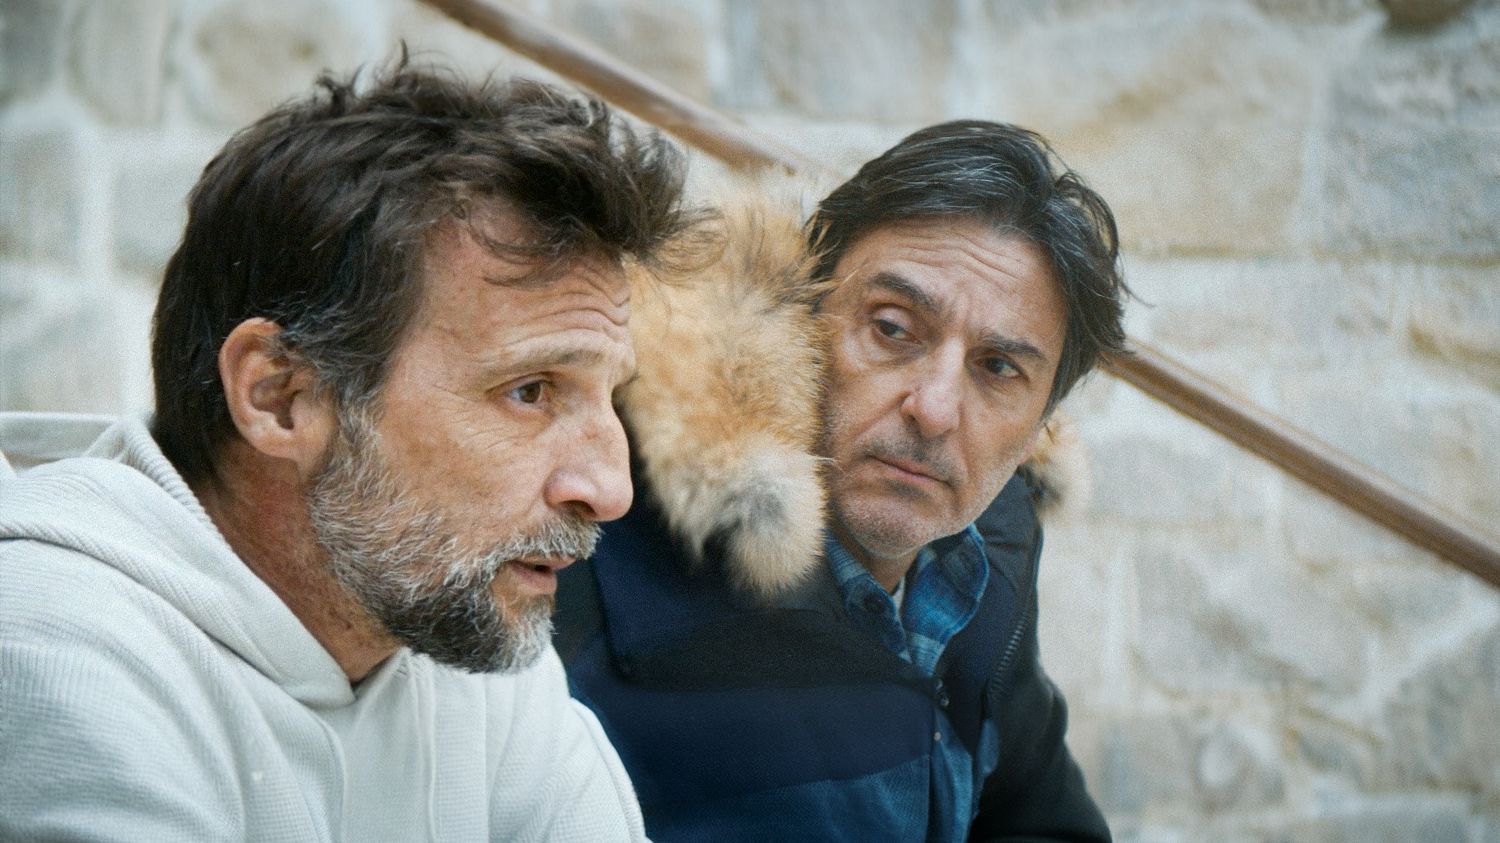 "Brothers": Mathieu Kassovitz and Yvan Attal in the incredible story of a brotherhood sealed in the depths of the forest